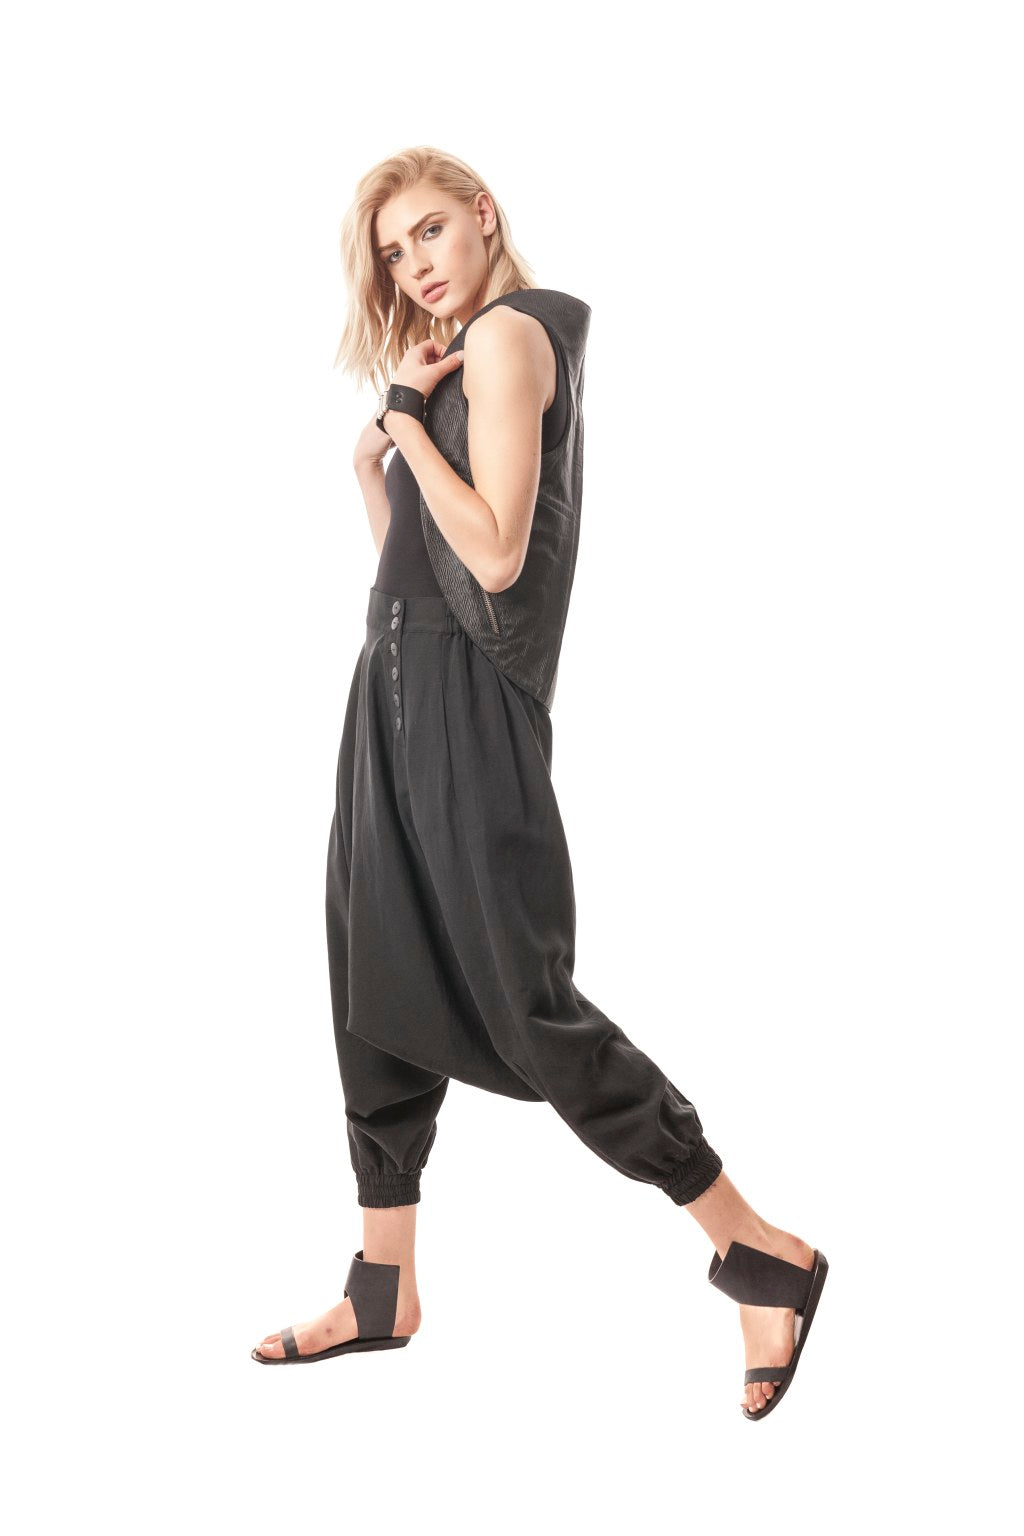 Drop-Crotch Japanese Pant, comfortable and chic